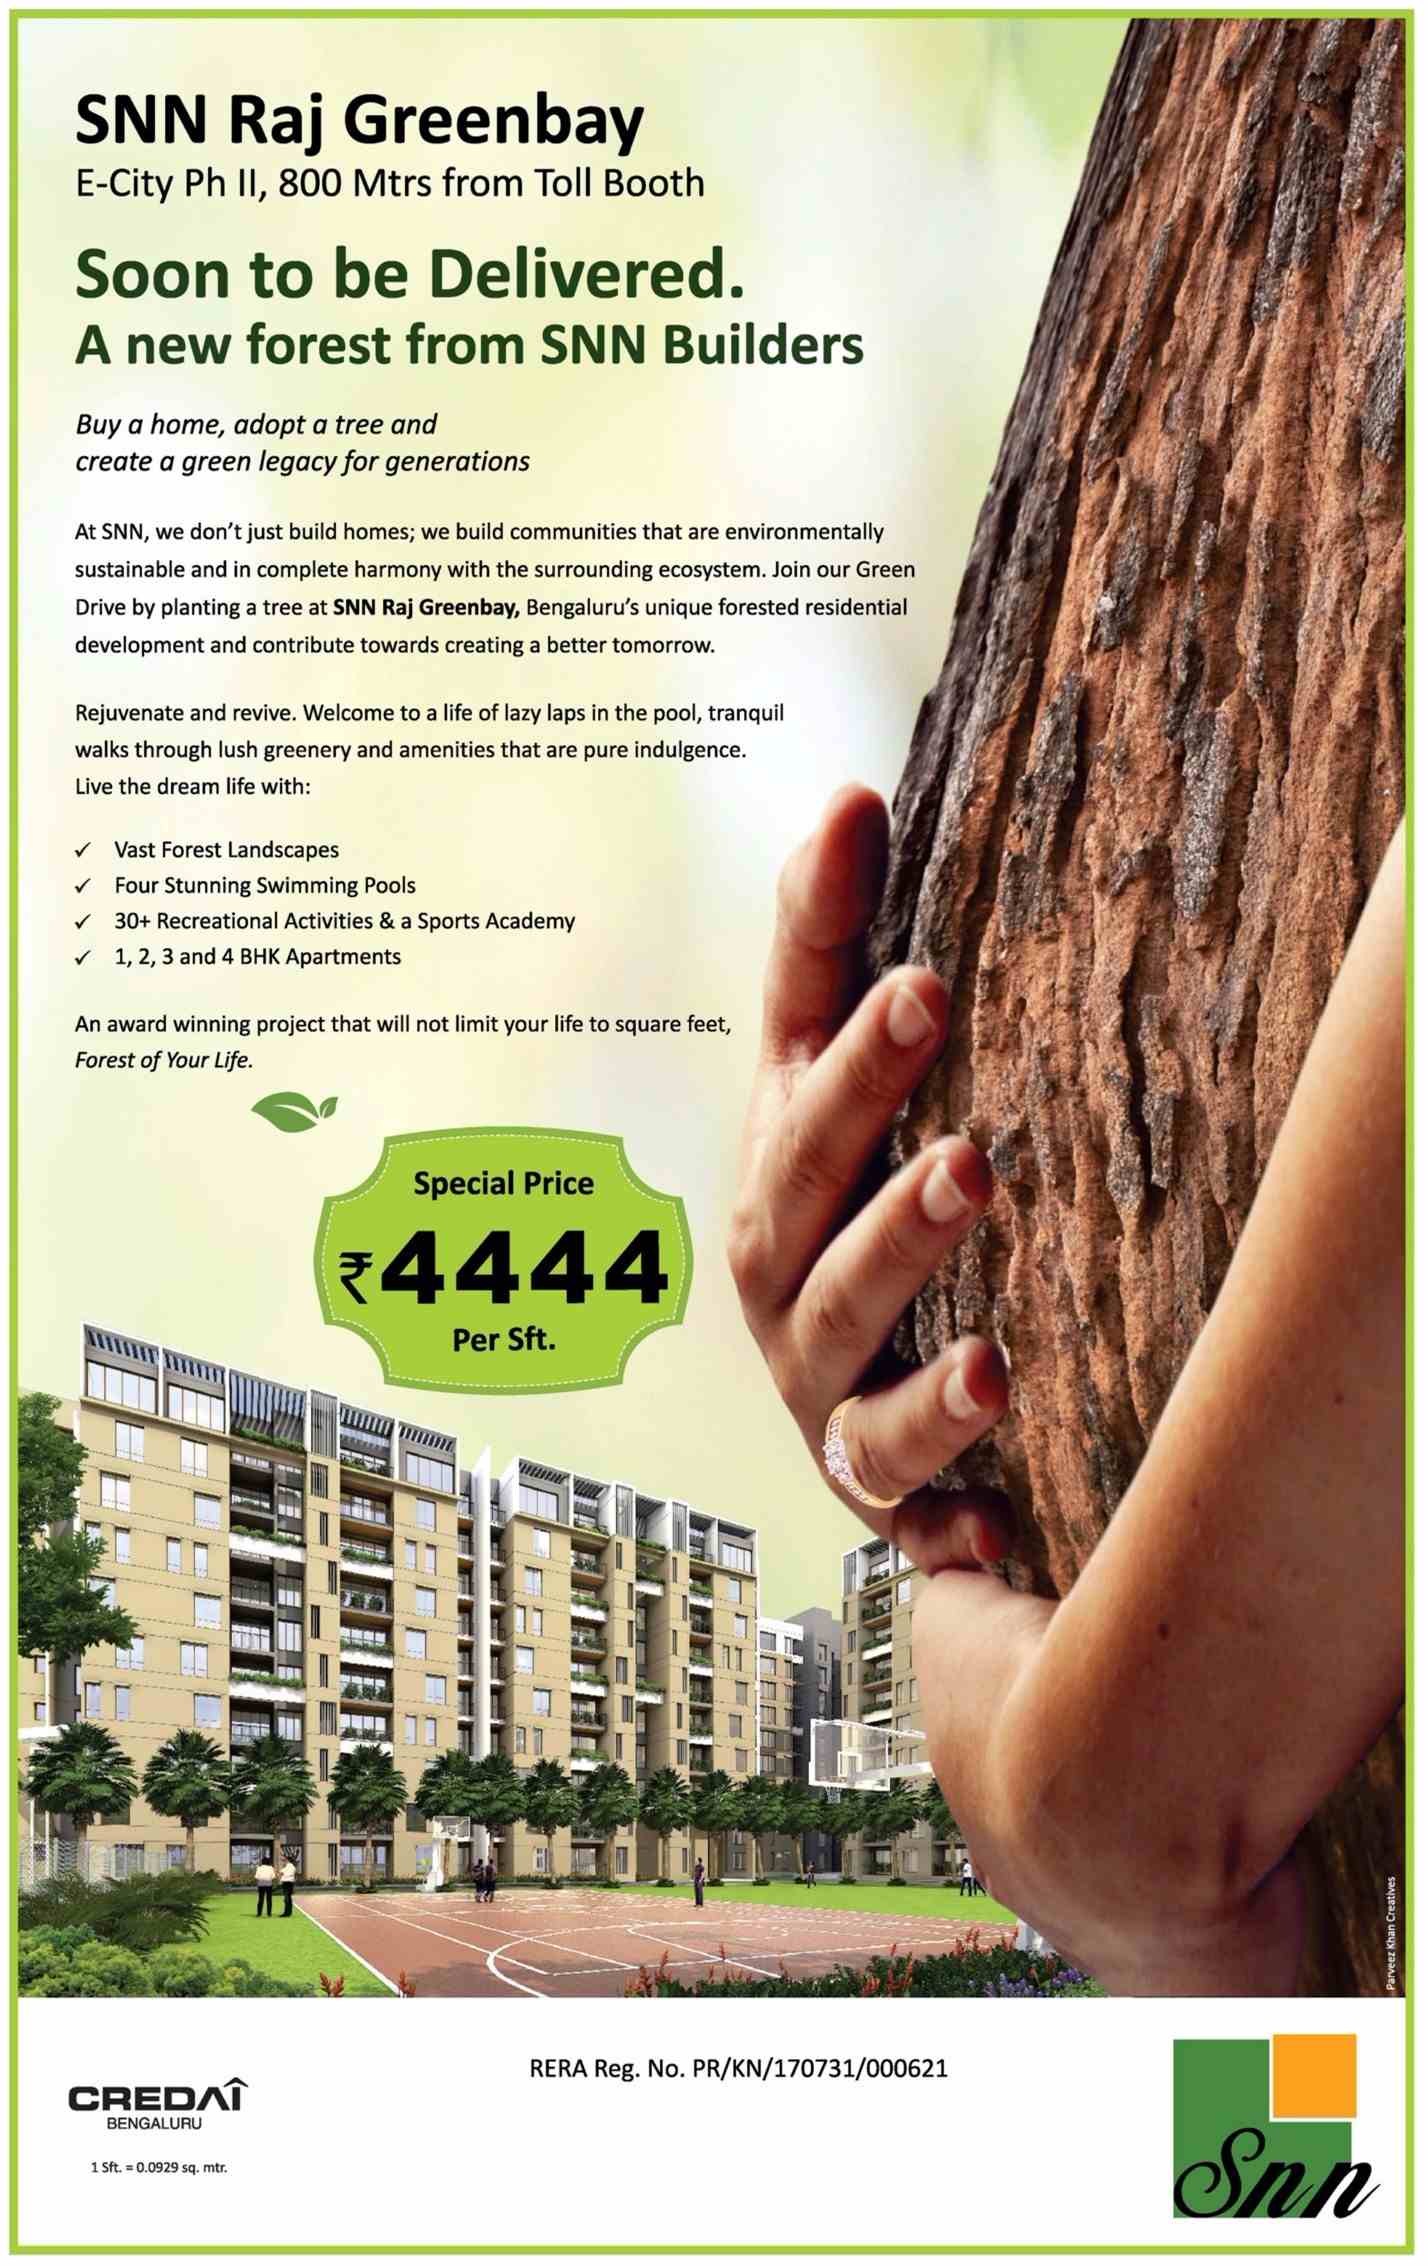 SNN Raj Greenbay - Soon to be delivered, a new forest from SNN Builders in Bangalore Update